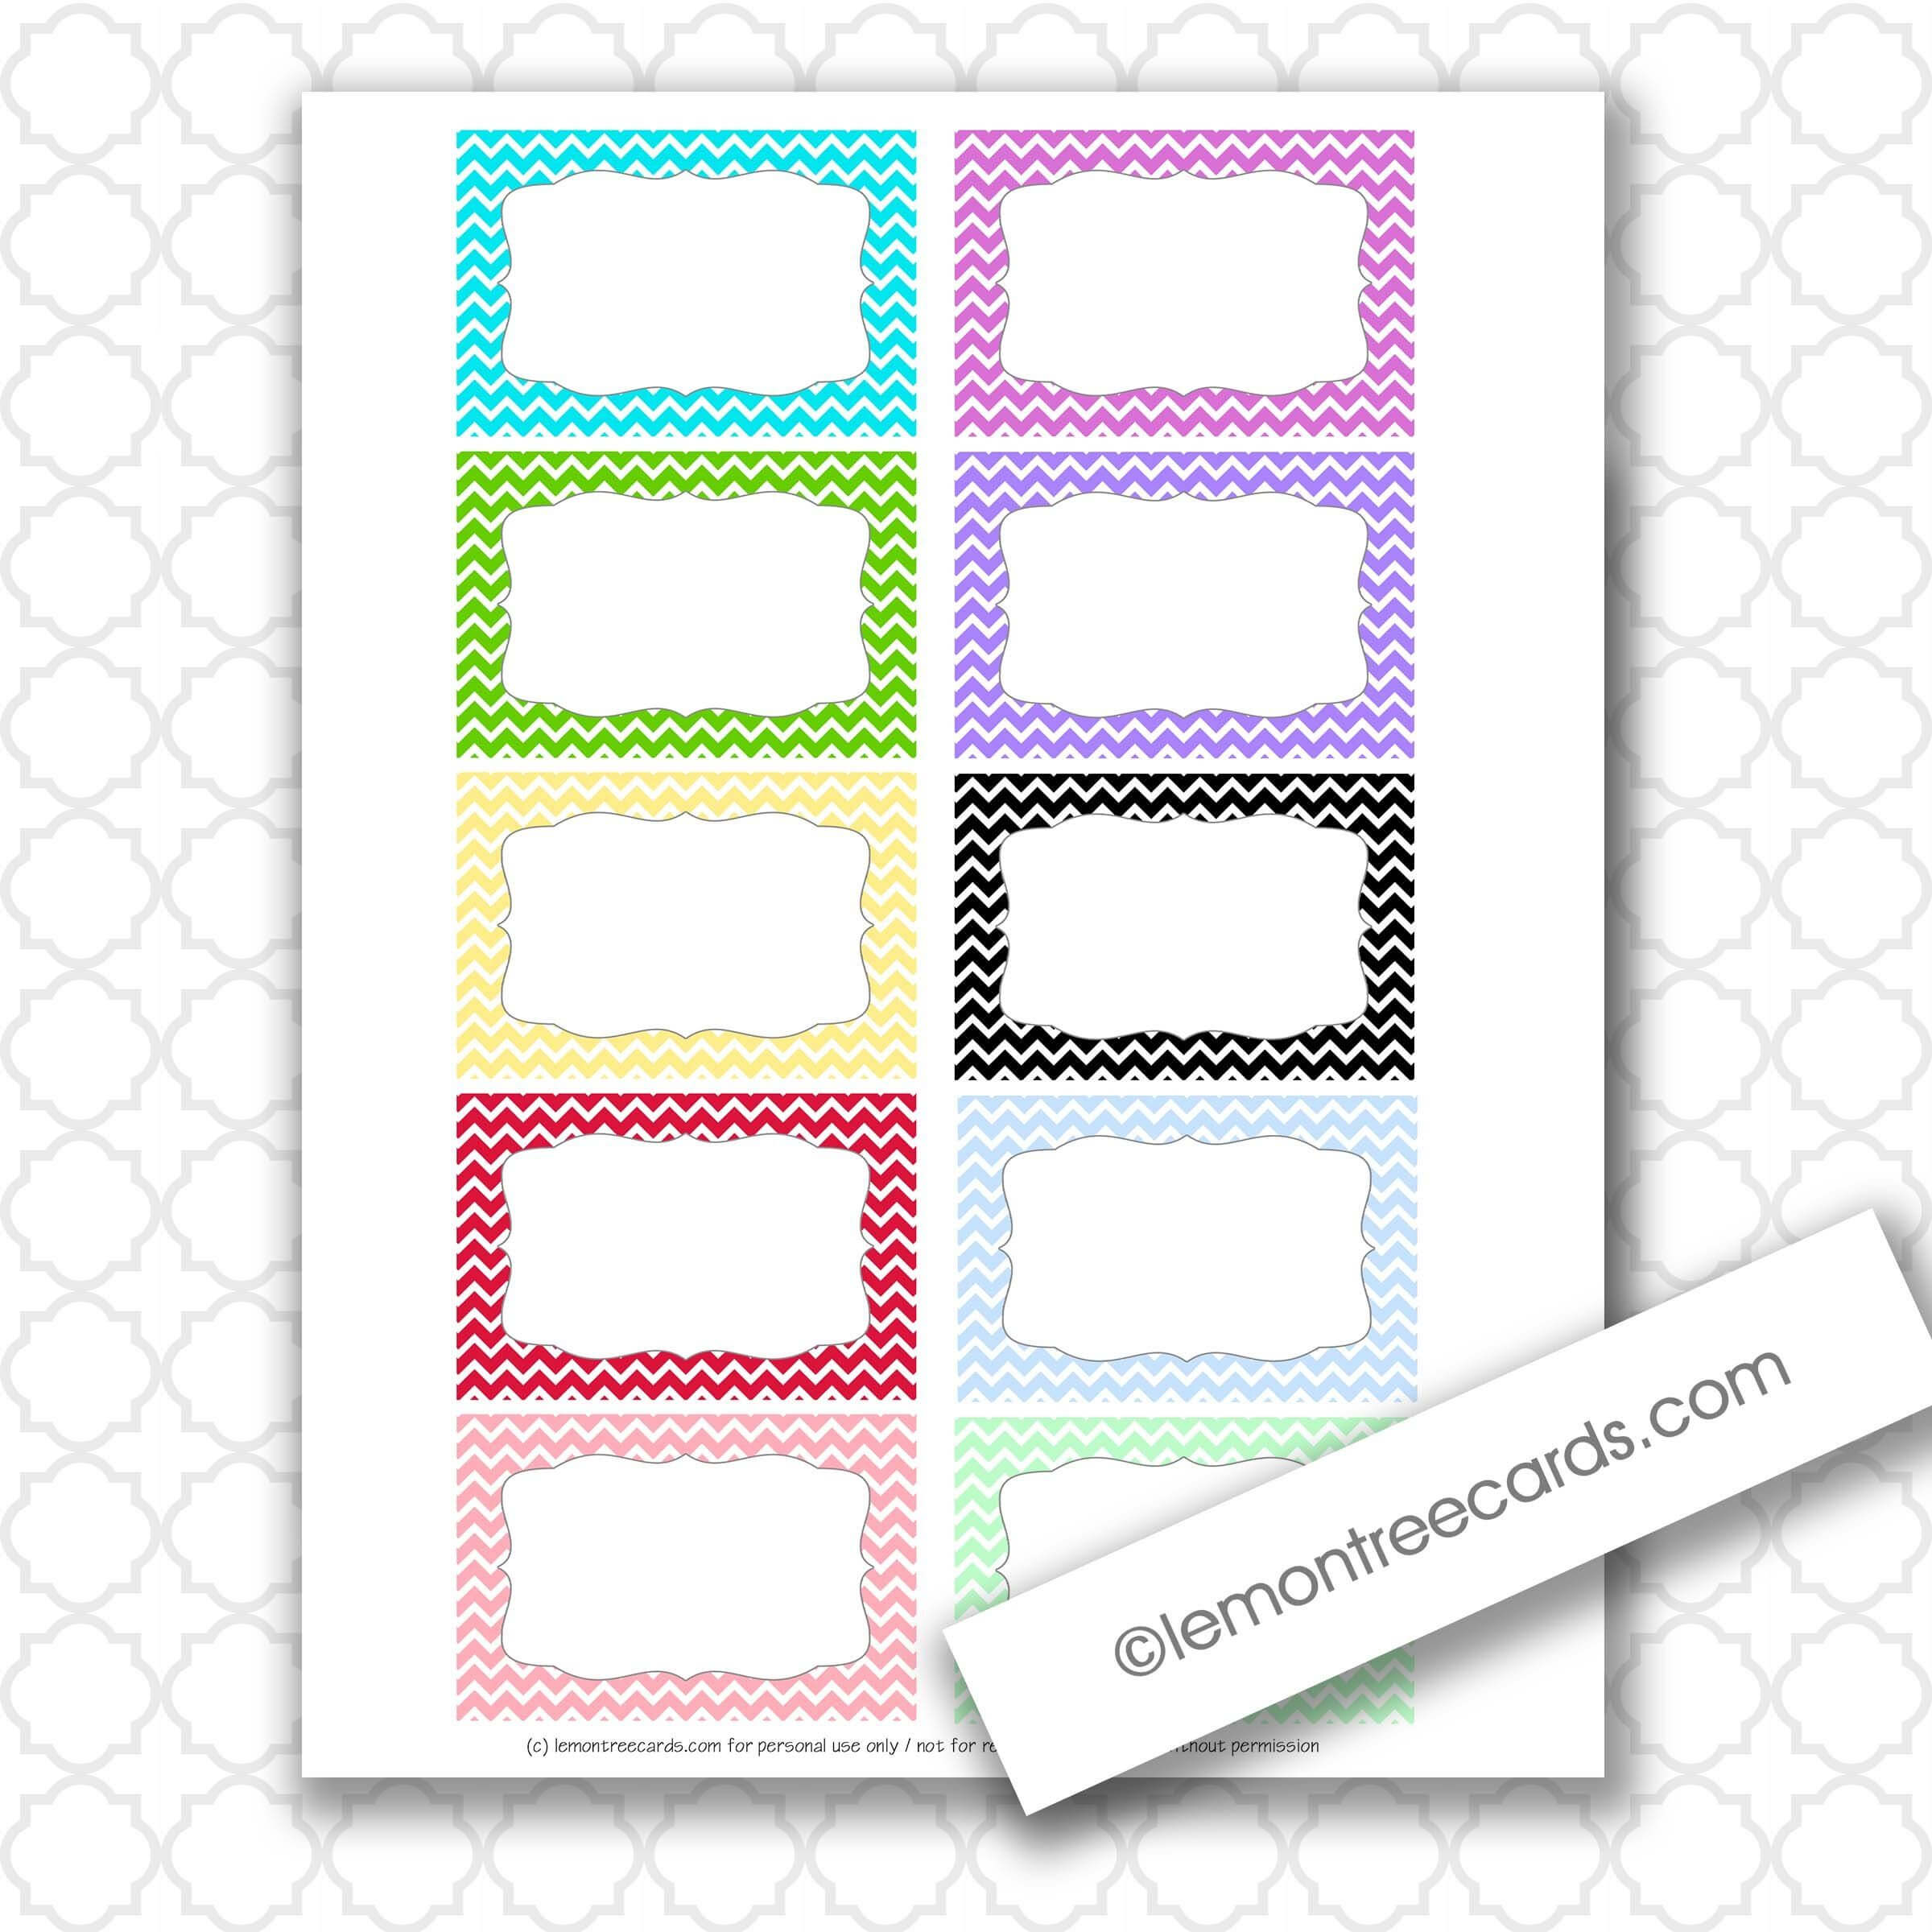 007 Free Index Card Template Ideas Surprising Printable 3X5 For 3X5